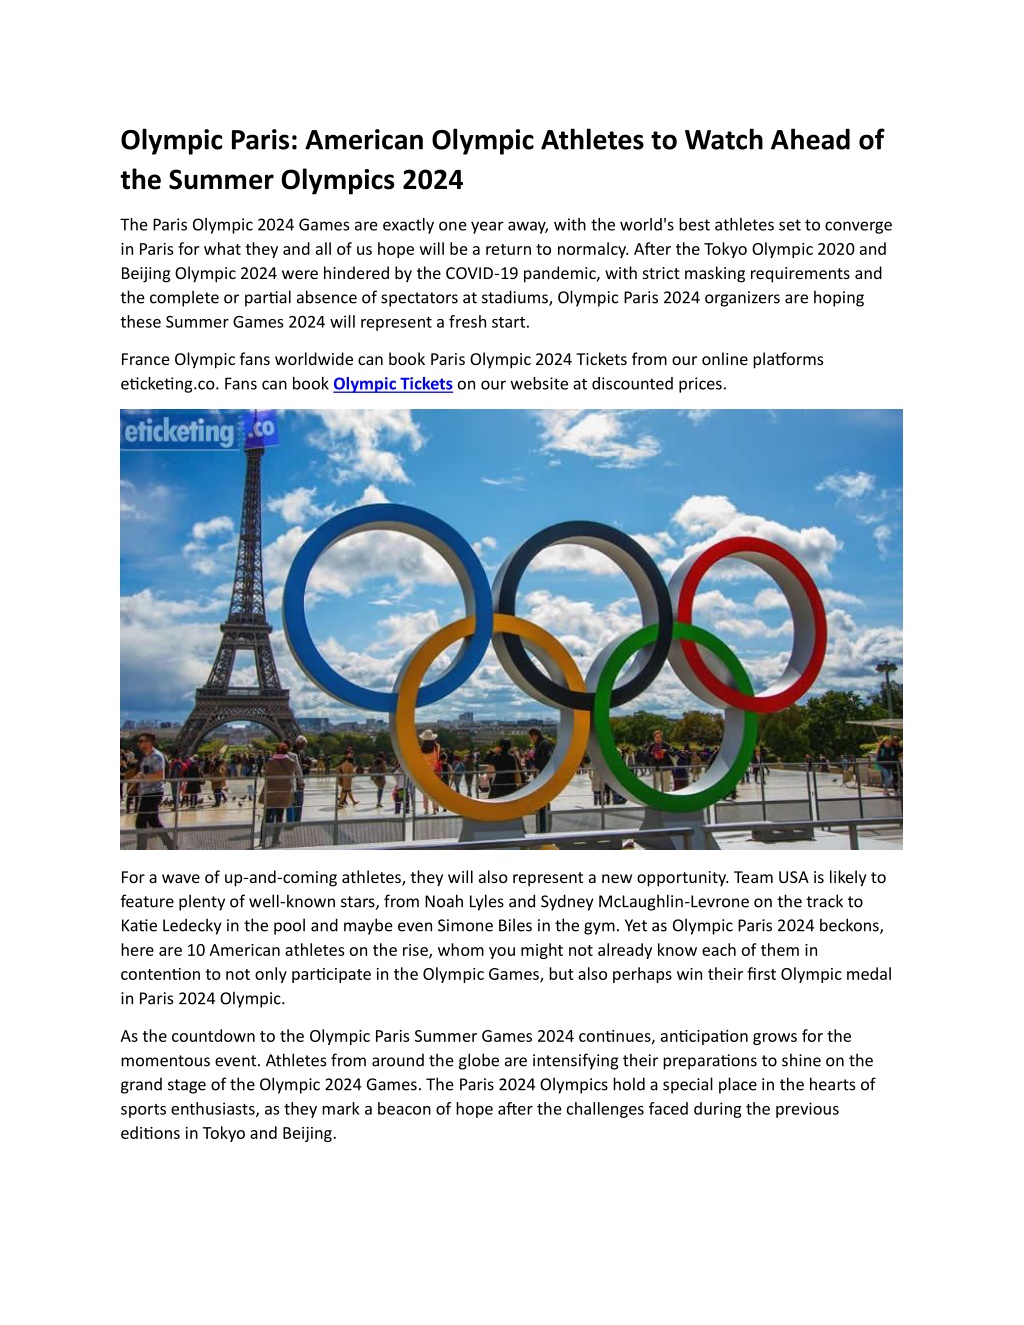 PPT Olympic Paris American Olympic Athletes to Watch Ahead of the